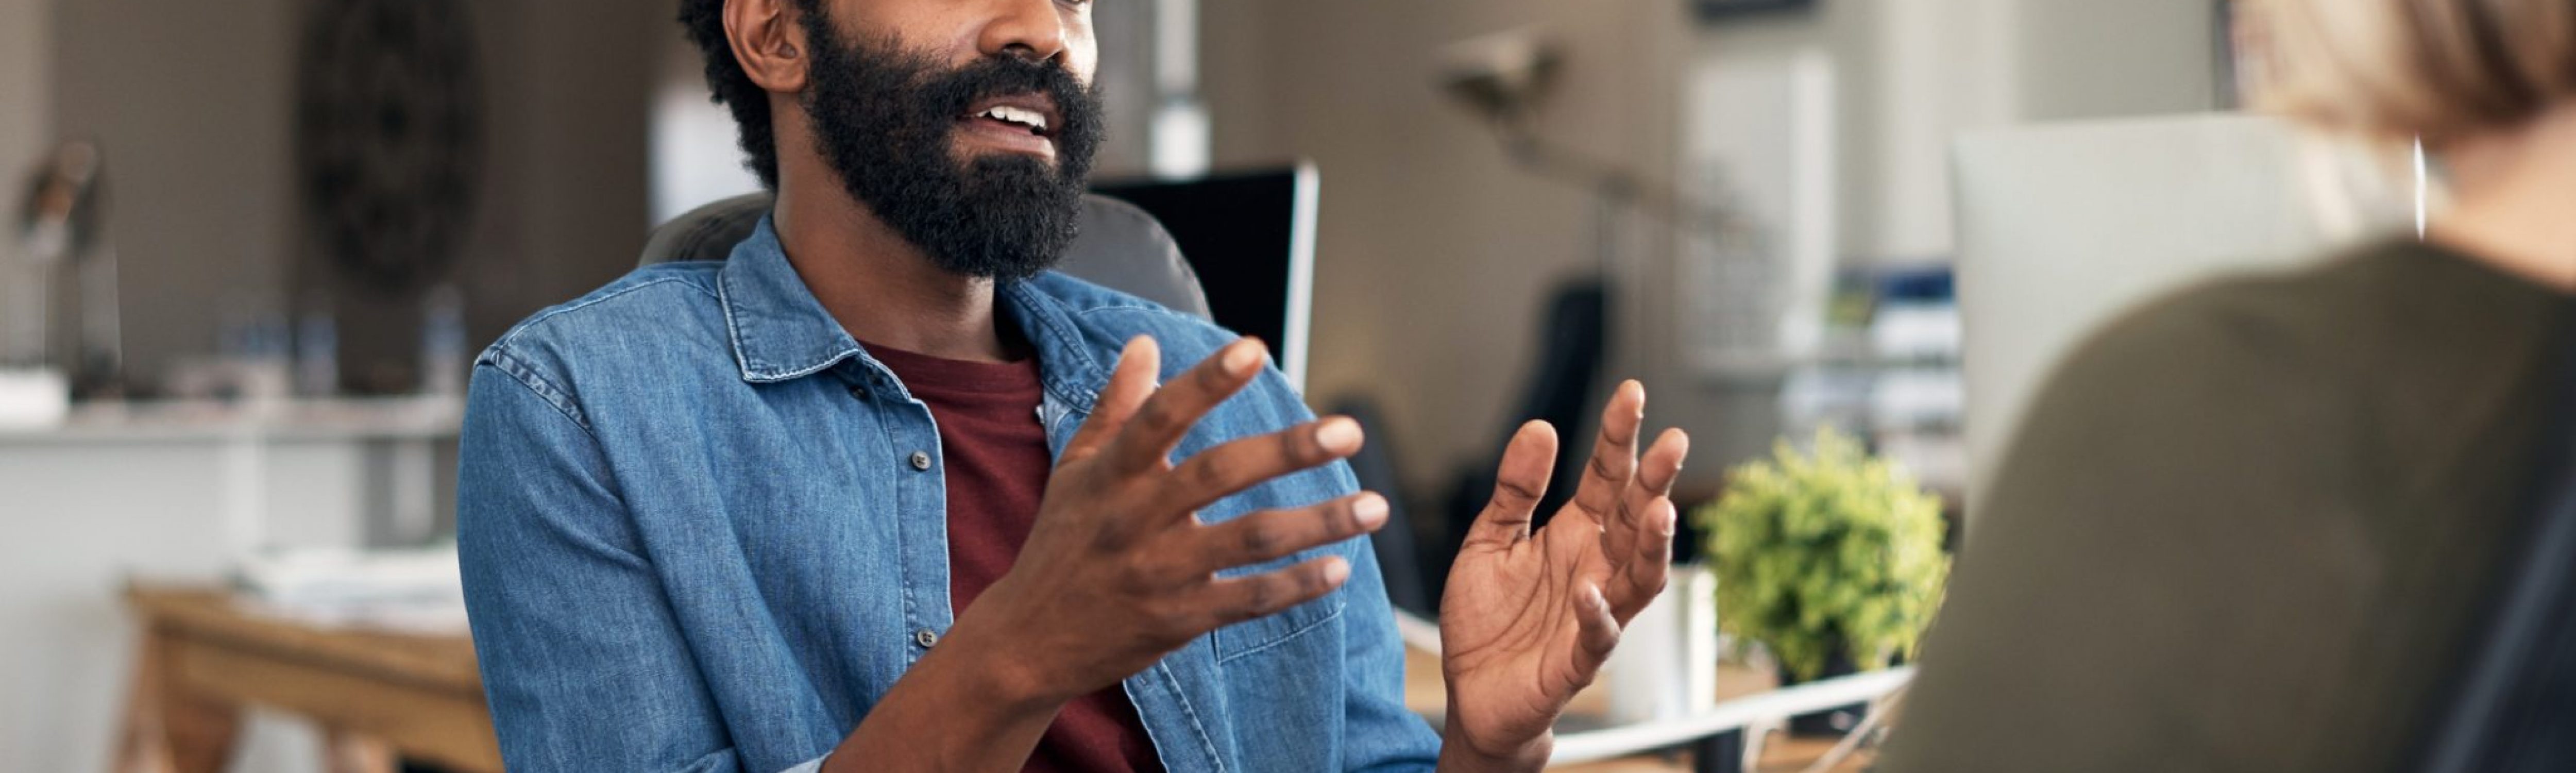 Two casually dressed business individuals in a closed meeting, discussing feedback and planning in a creative office environment. The individual has short black afro hair with a black beard dressed in a maroon tee shirt and a denim long-sleeved on top.